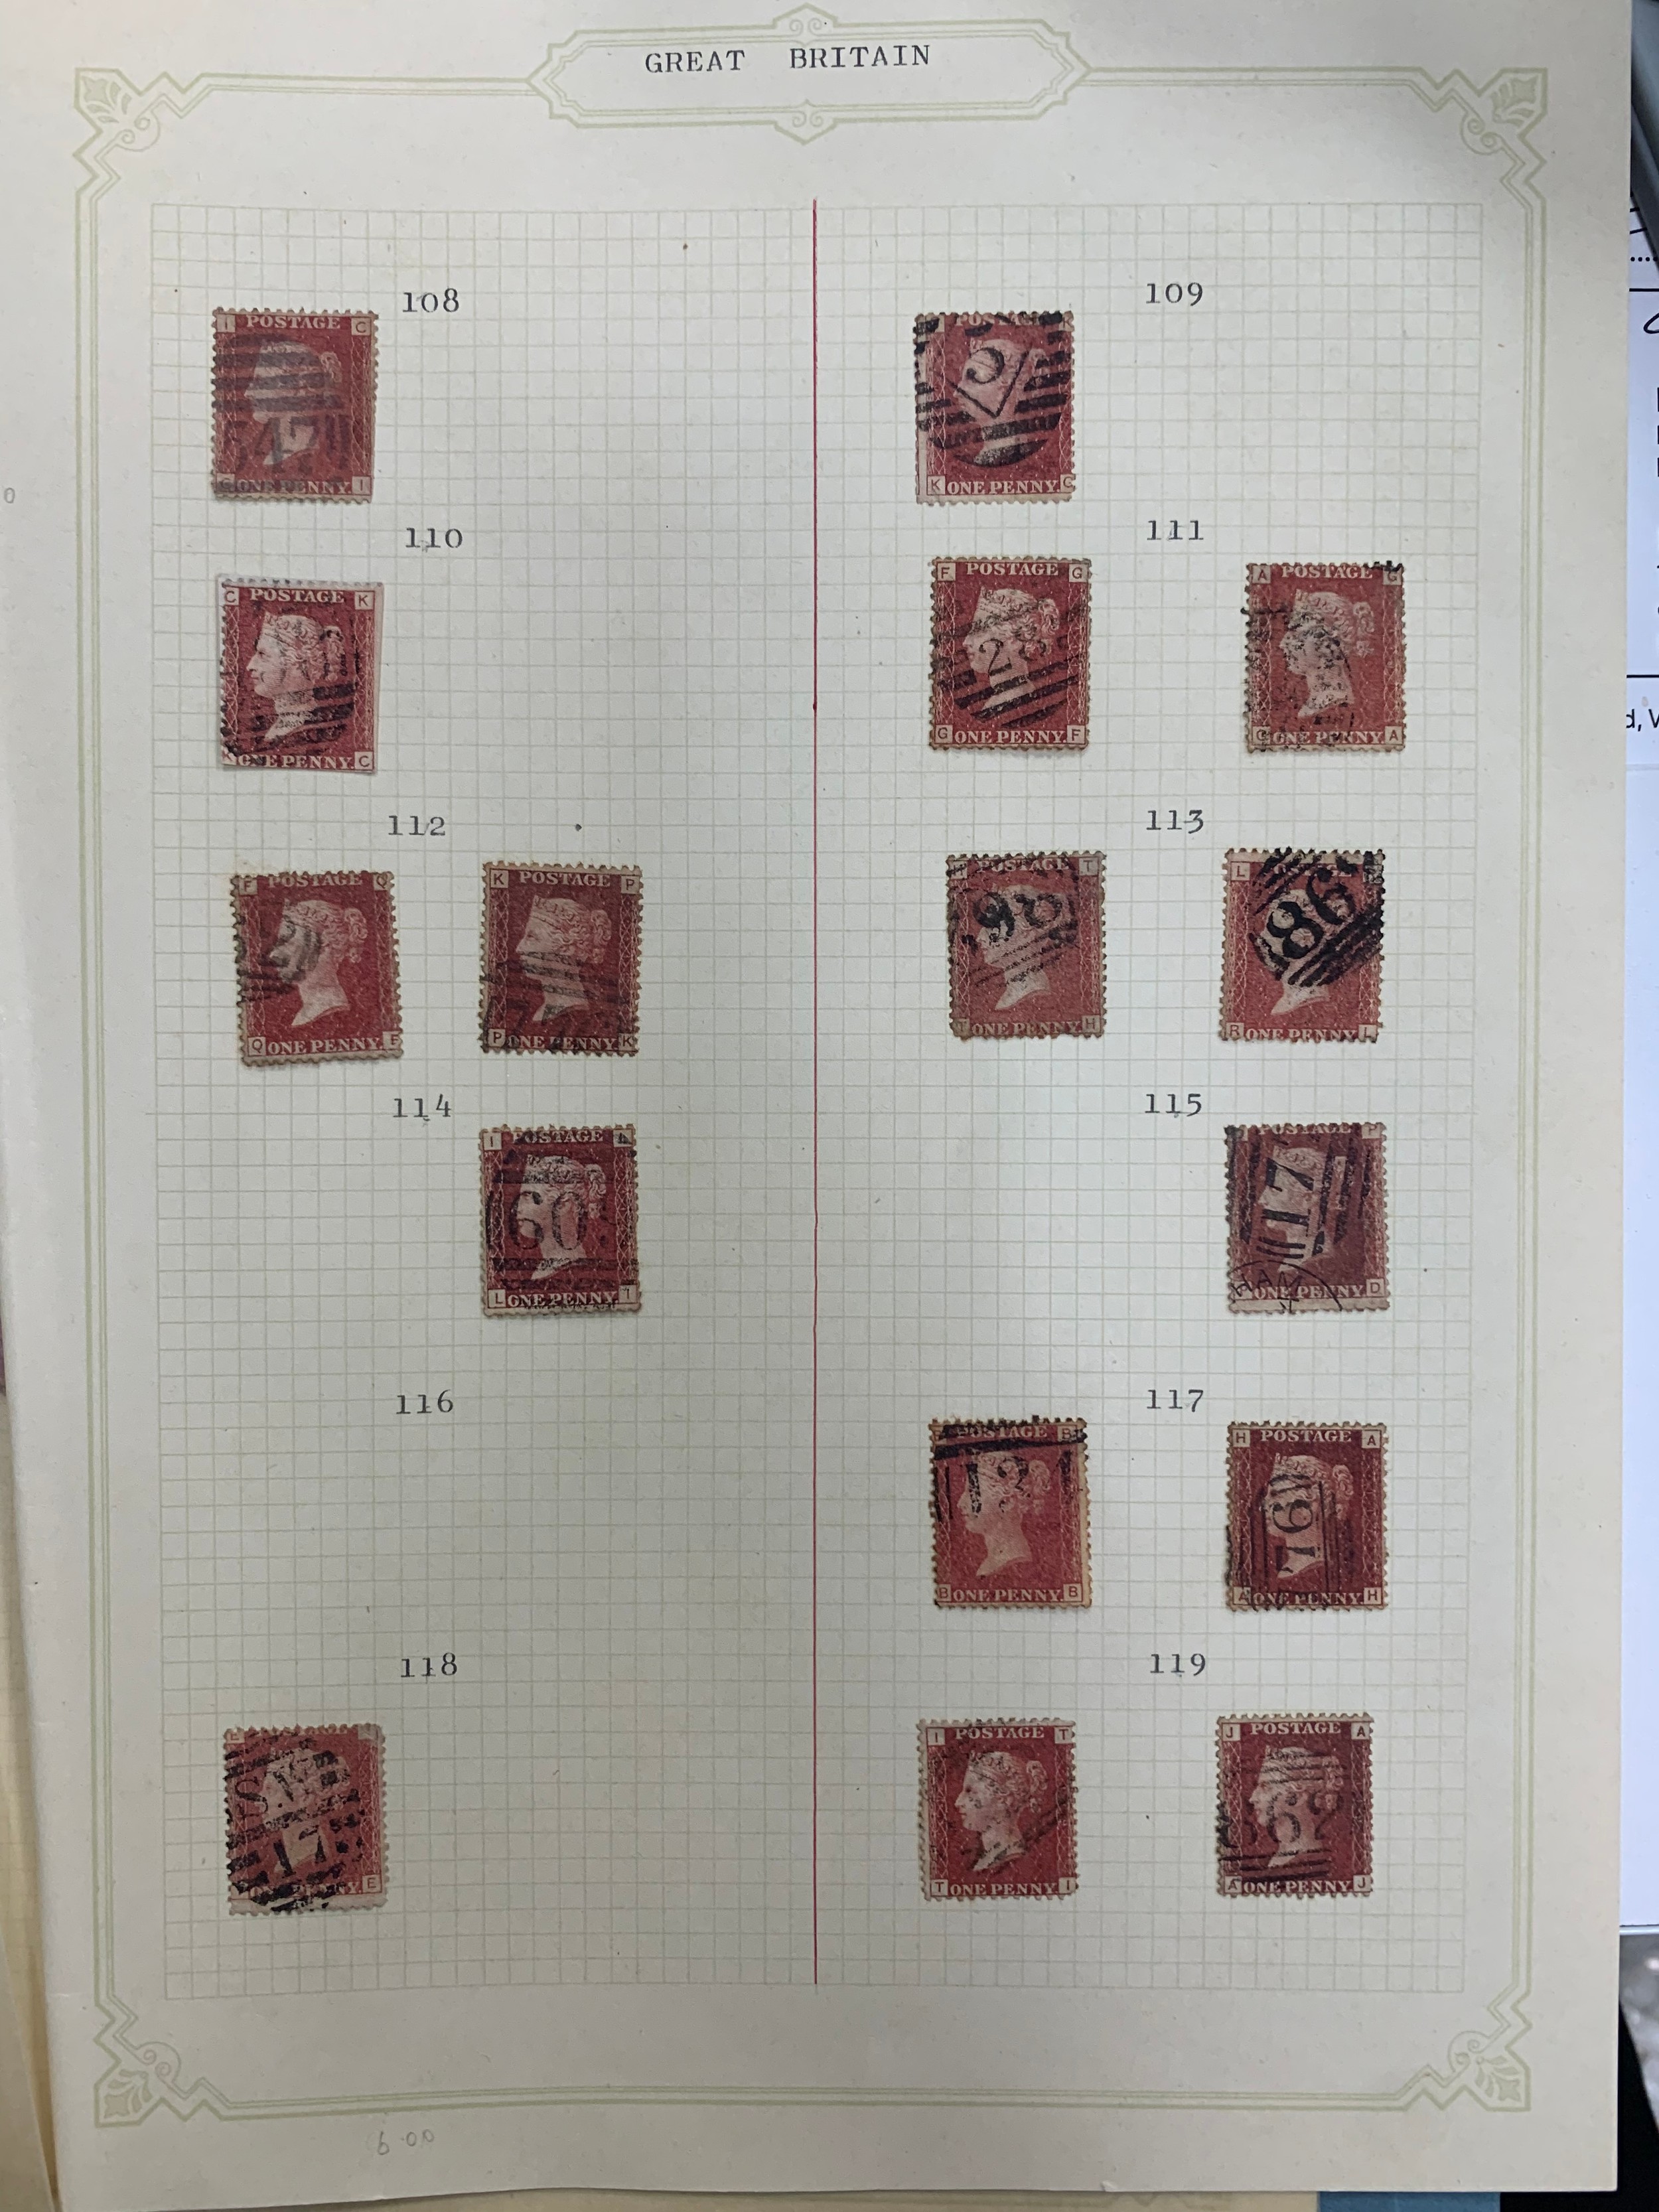 Great Britain, 1858-64 annotated and well-laid out collection of 1d Penny Reds FU from plate 73 to - Image 3 of 12